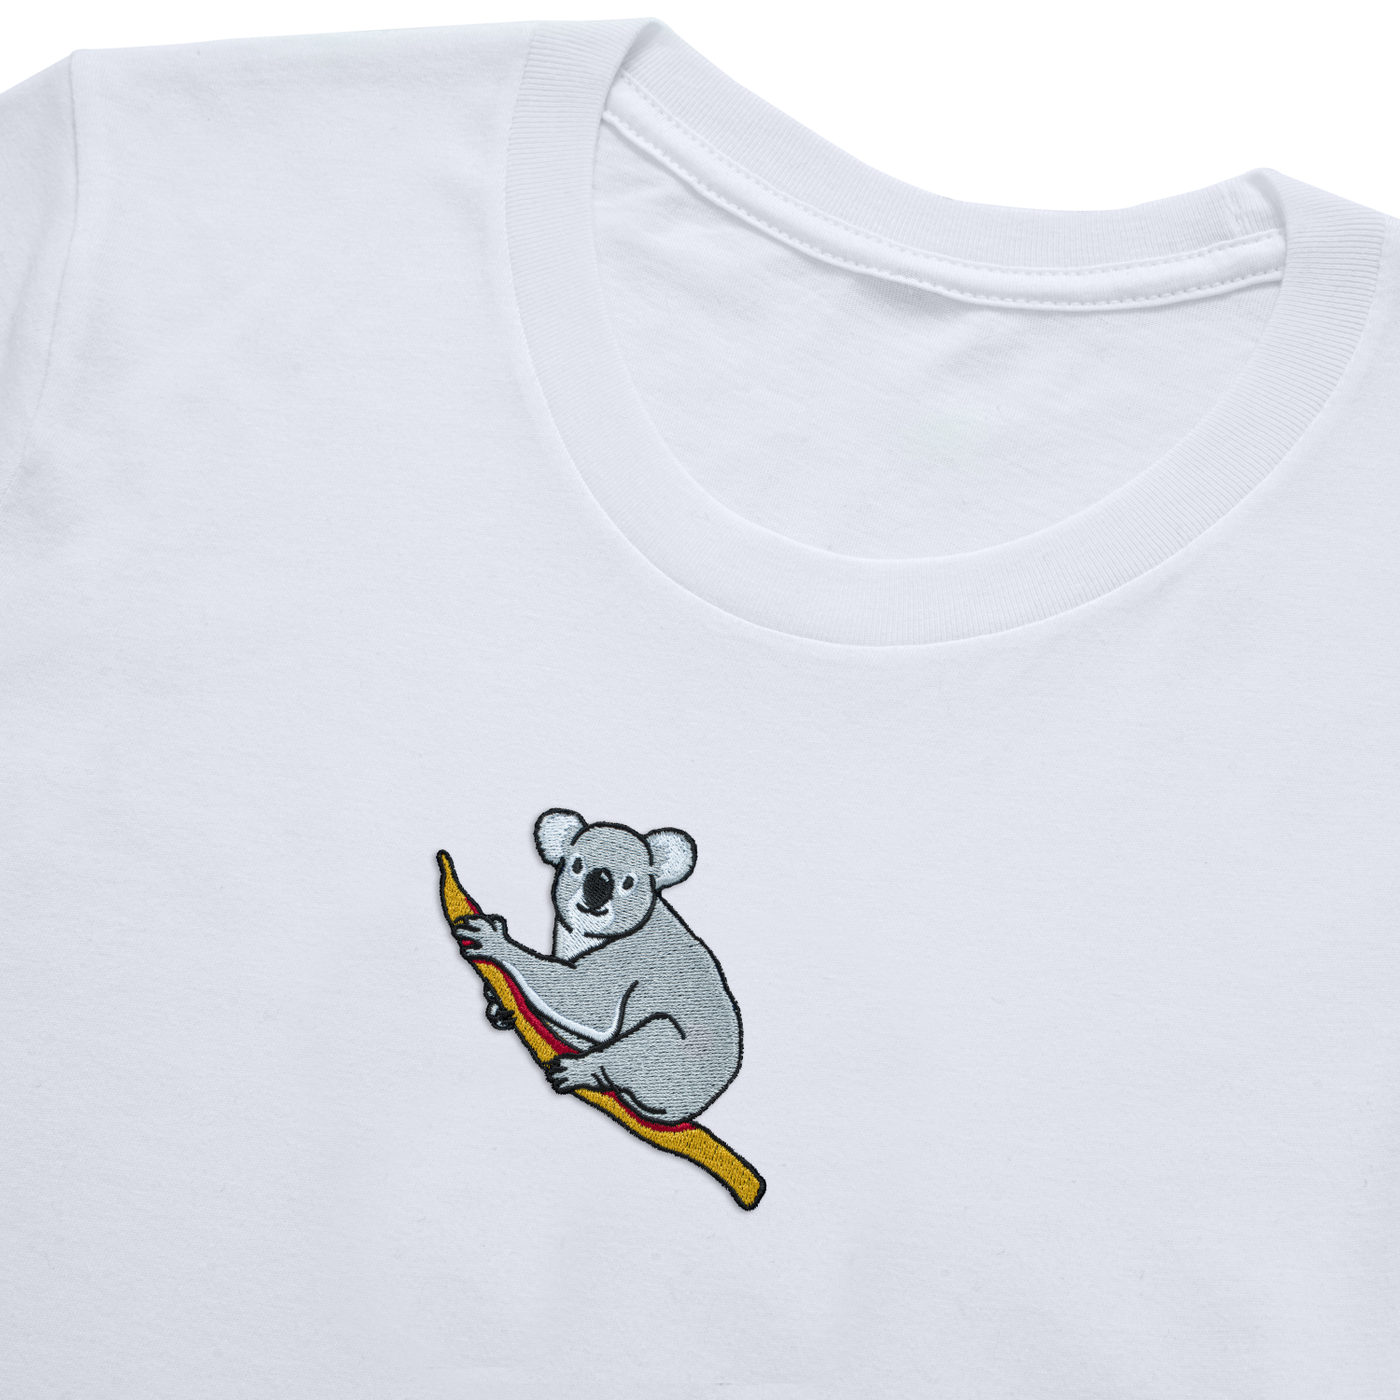 Bobby's Planet Men's Embroidered Koala T-Shirt from Australia Down Under Animals Collection in White Color#color_white